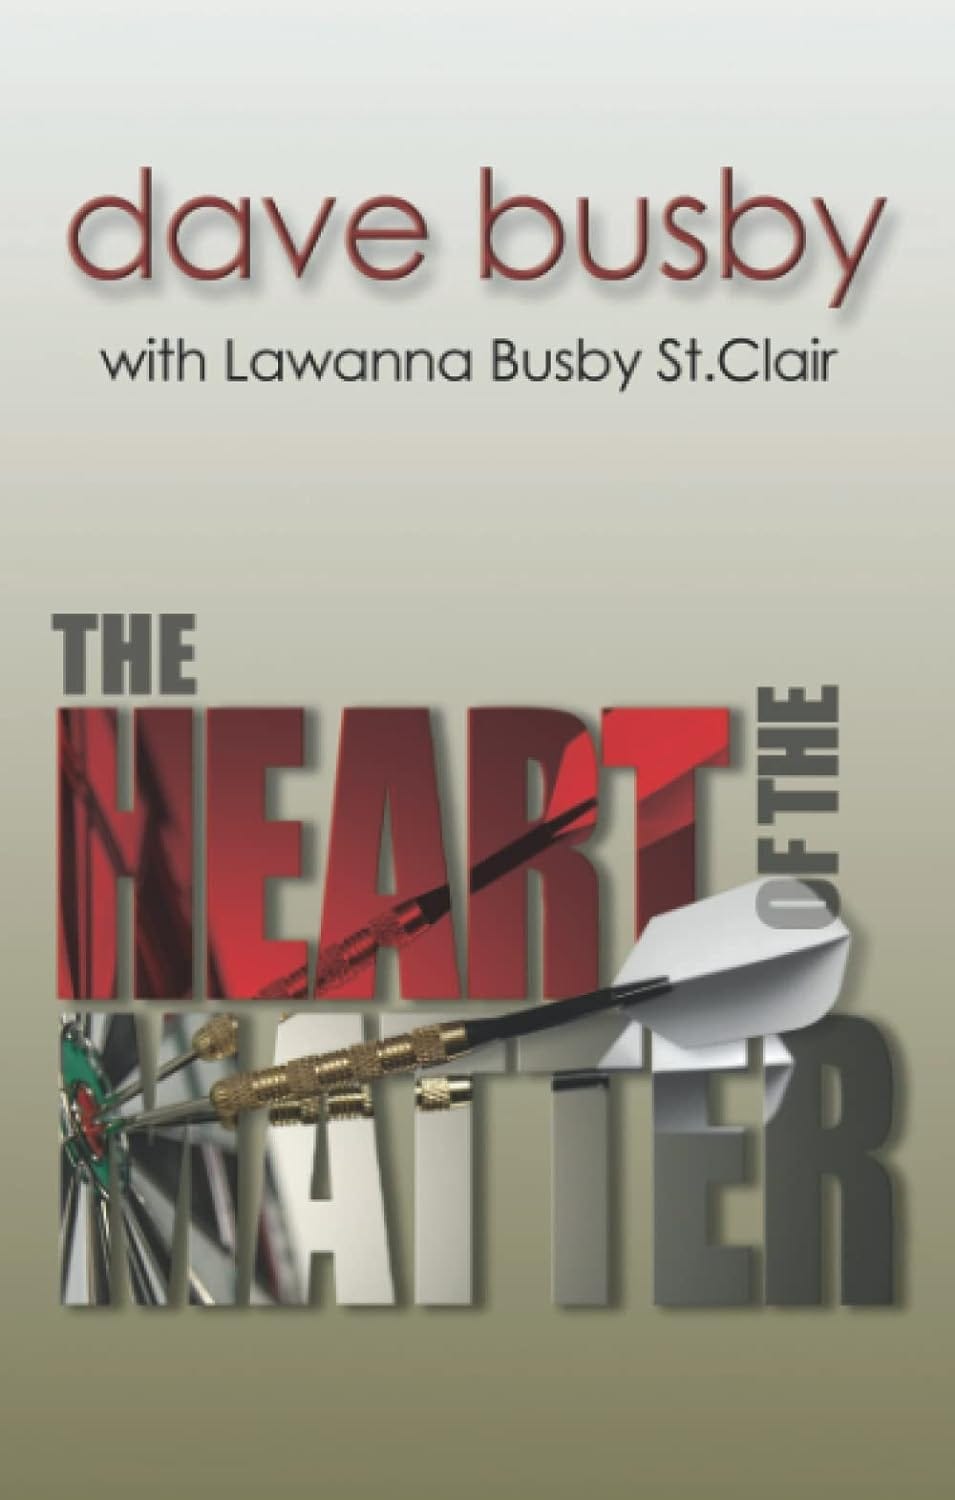 Image of a book cover from The Heart of the Matter by Dave Busby with Lawanna Busby St. Clair.